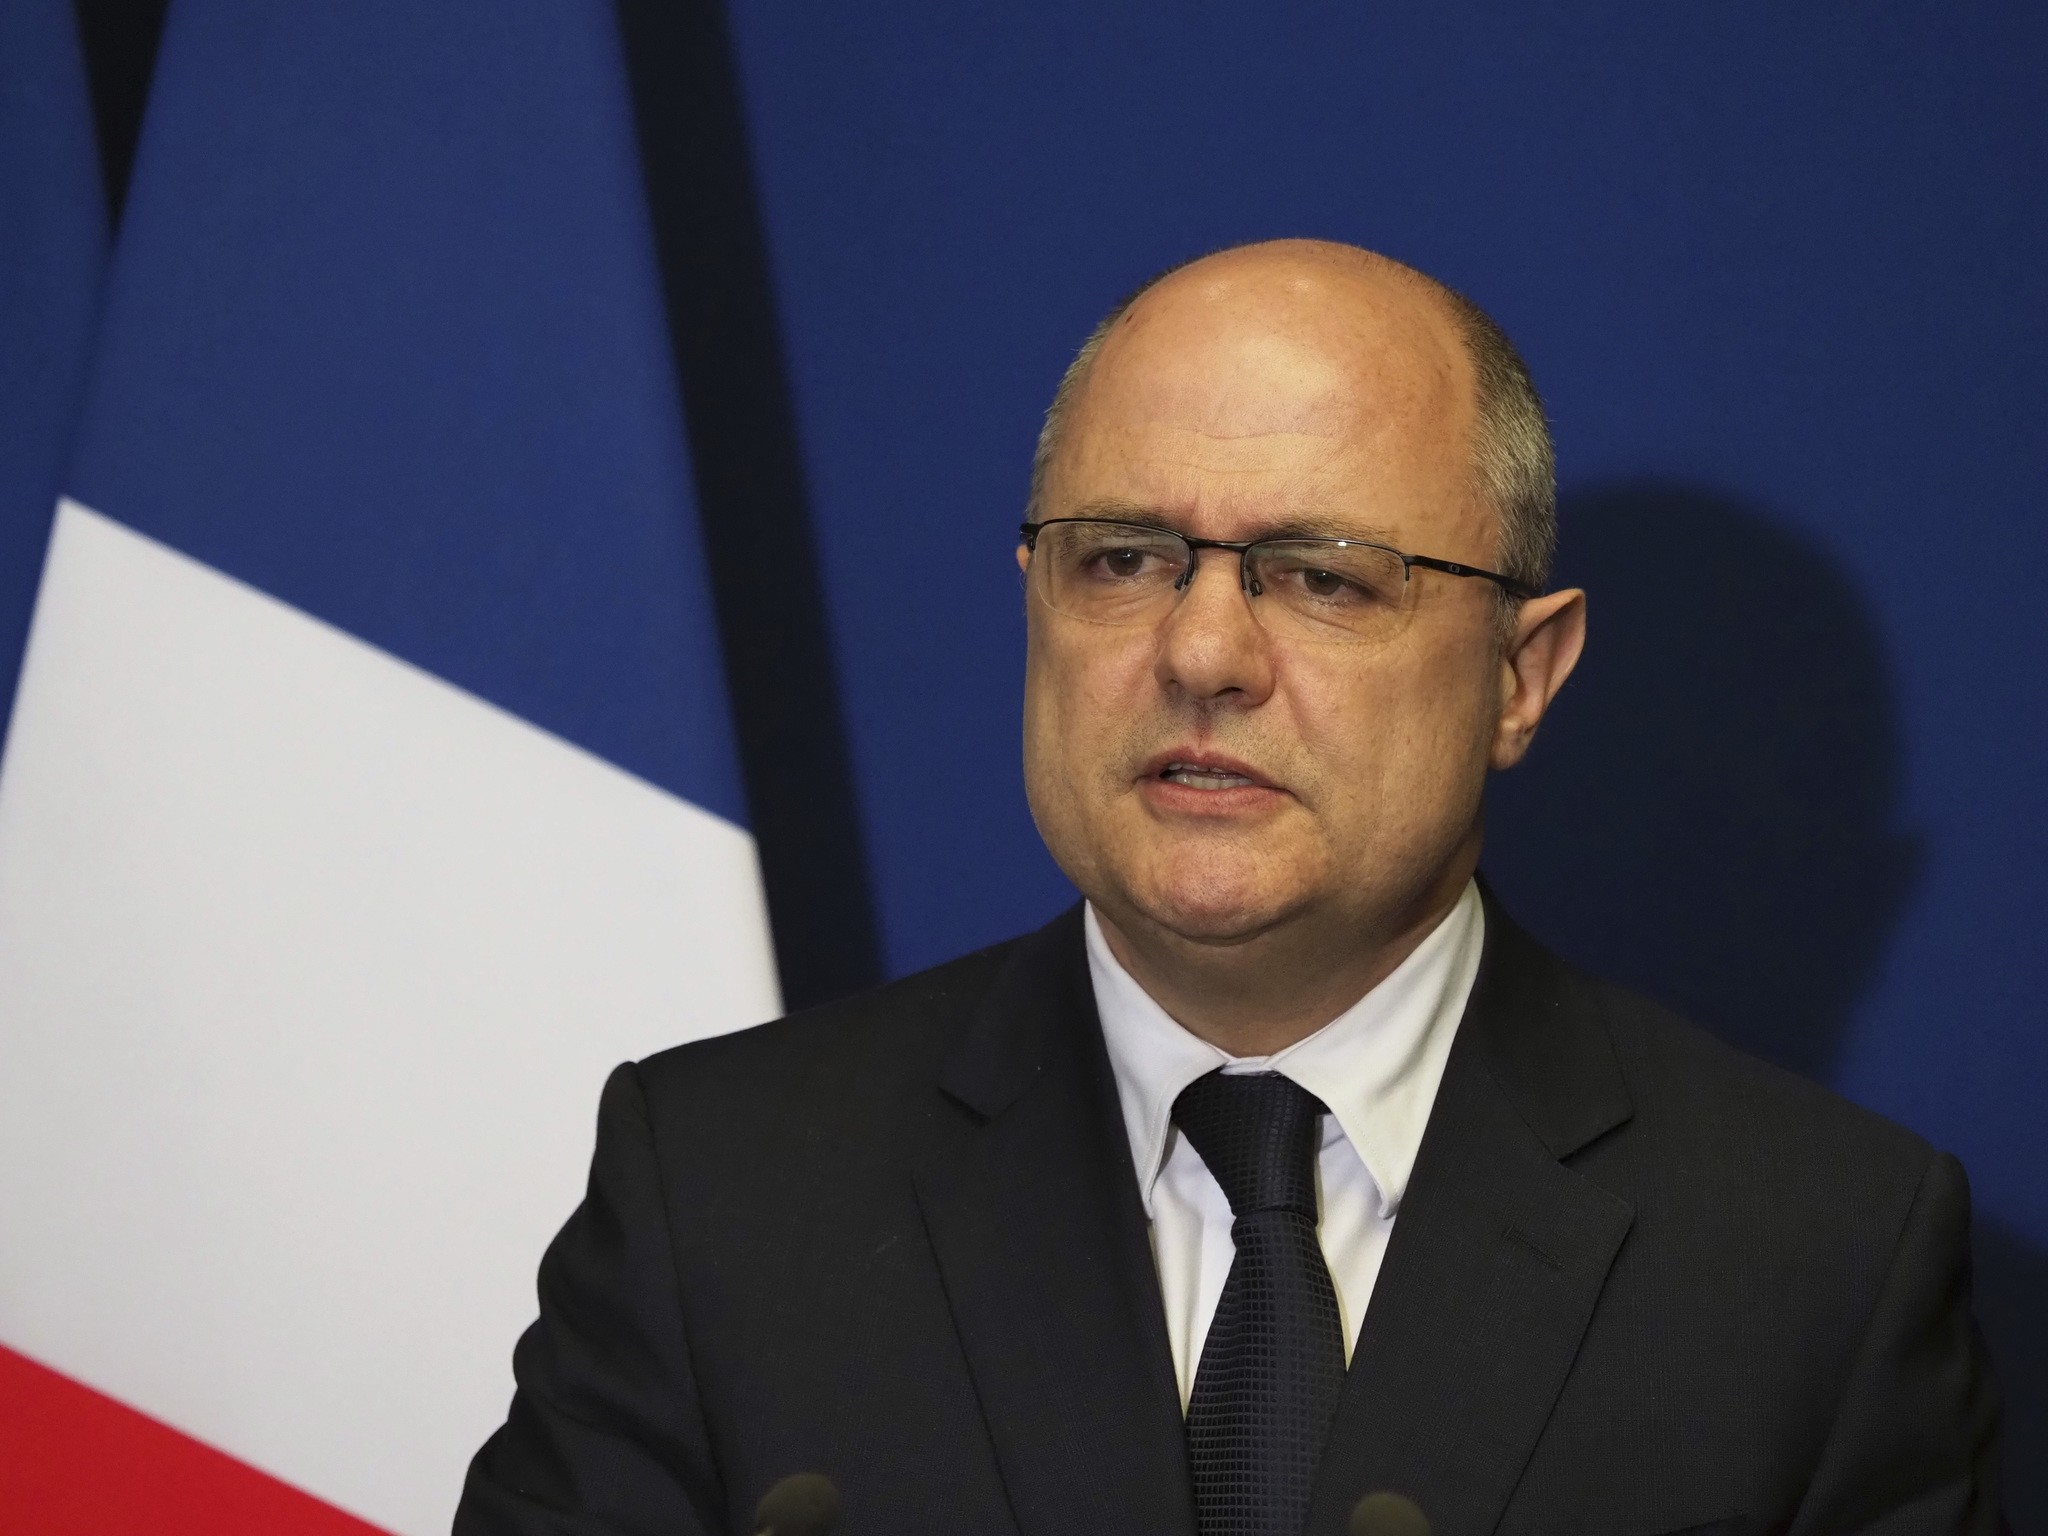 France's Interior Minister Bruno Le Roux gives a press conference, in Bobigny, north of Paris, Tuesday, March 21, 2017.  (AP Photo)